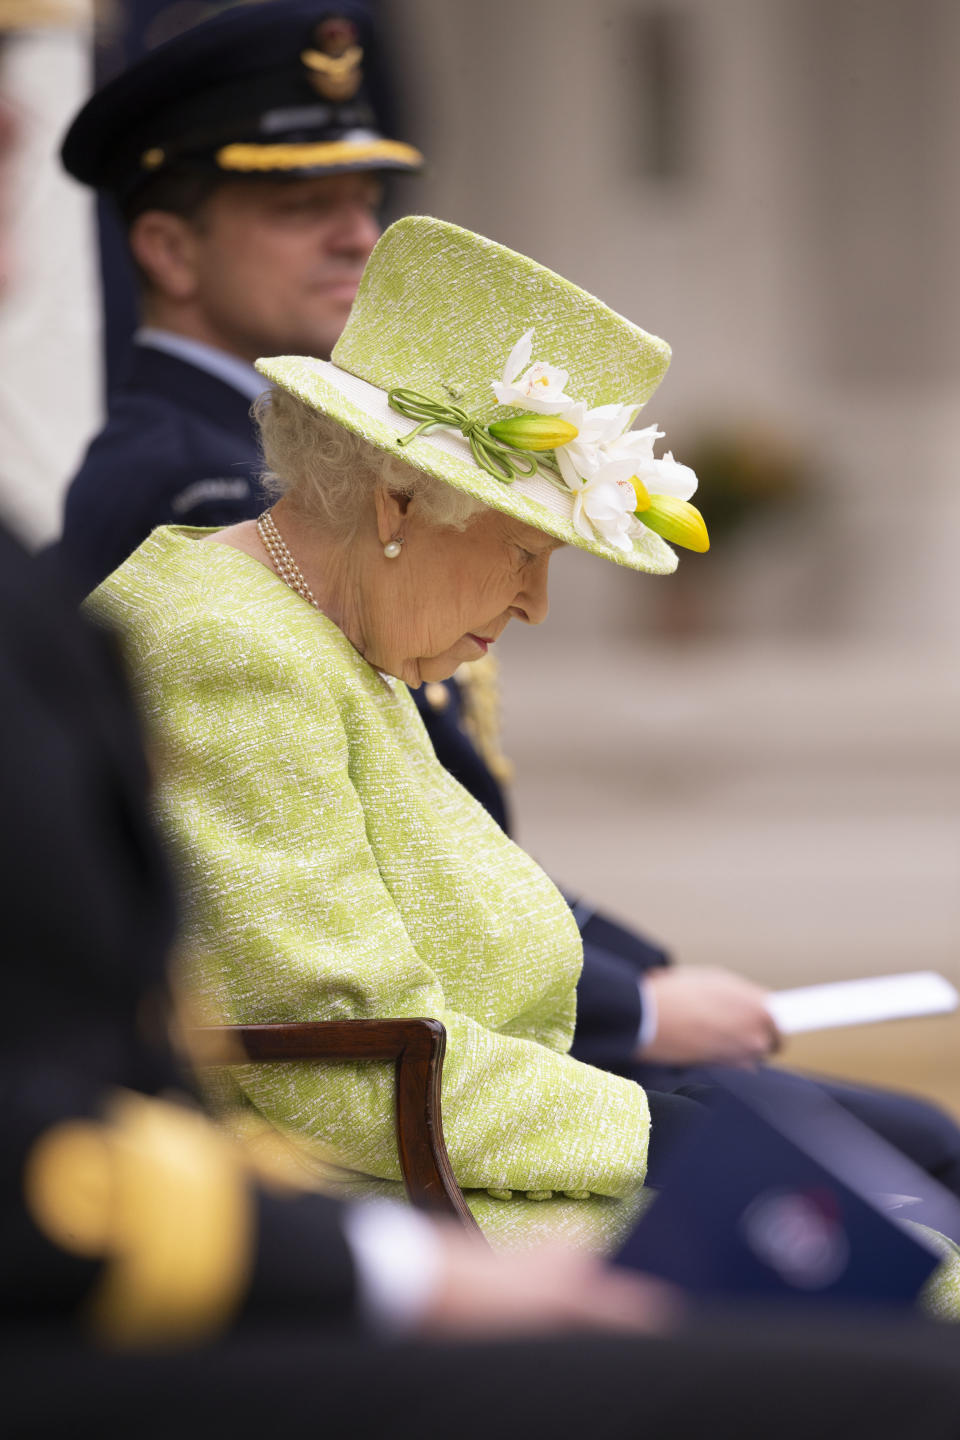 Queen Elizabeth II sits for a service to mark the Centenary of the Royal Australian Air Force at the CWGC Air Forces Memorial in Runnymede, Surrey. Picture date: Wednesday March 31, 2021.